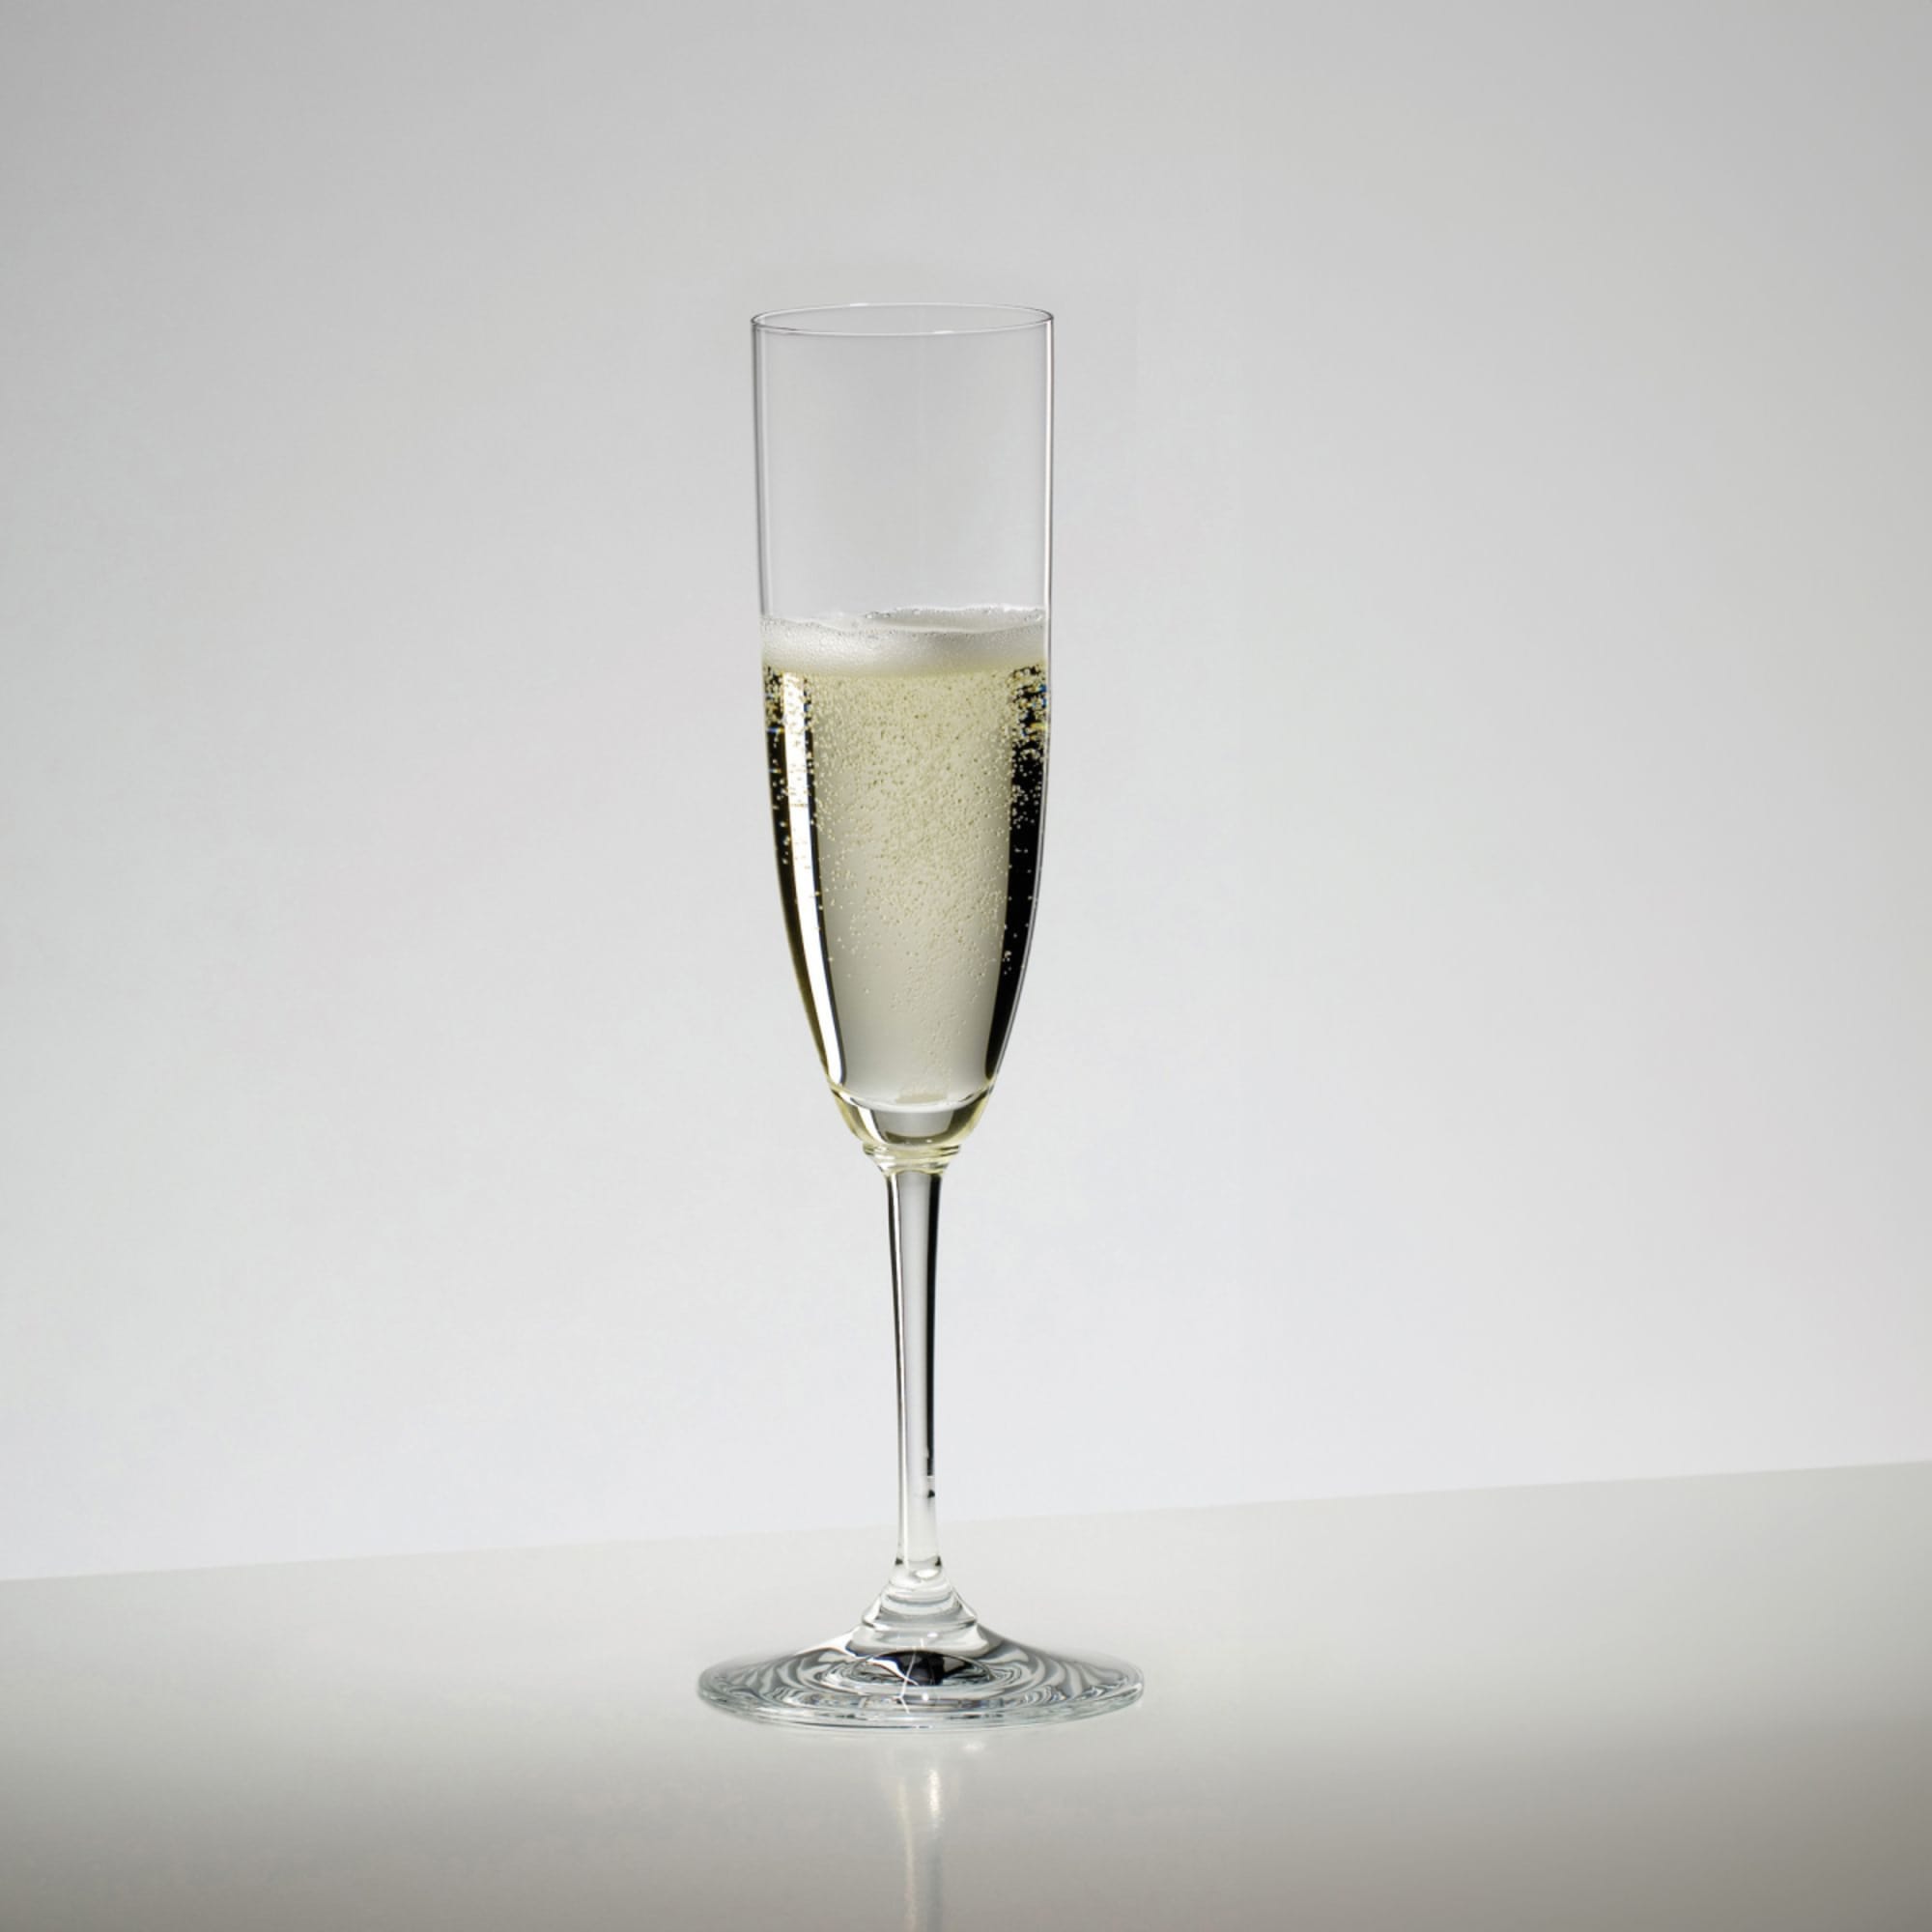 https://res.cloudinary.com/kitchenwarehouse/image/upload/c_fill,g_face,w_1250/f_auto/t_PDP_2000x2000/Supplier%20Images%20/2000px/Riedel-Vinum-Champagne-Flute-160ml-Set-of-2_2_2000px.jpg?imagetype=pdp_full